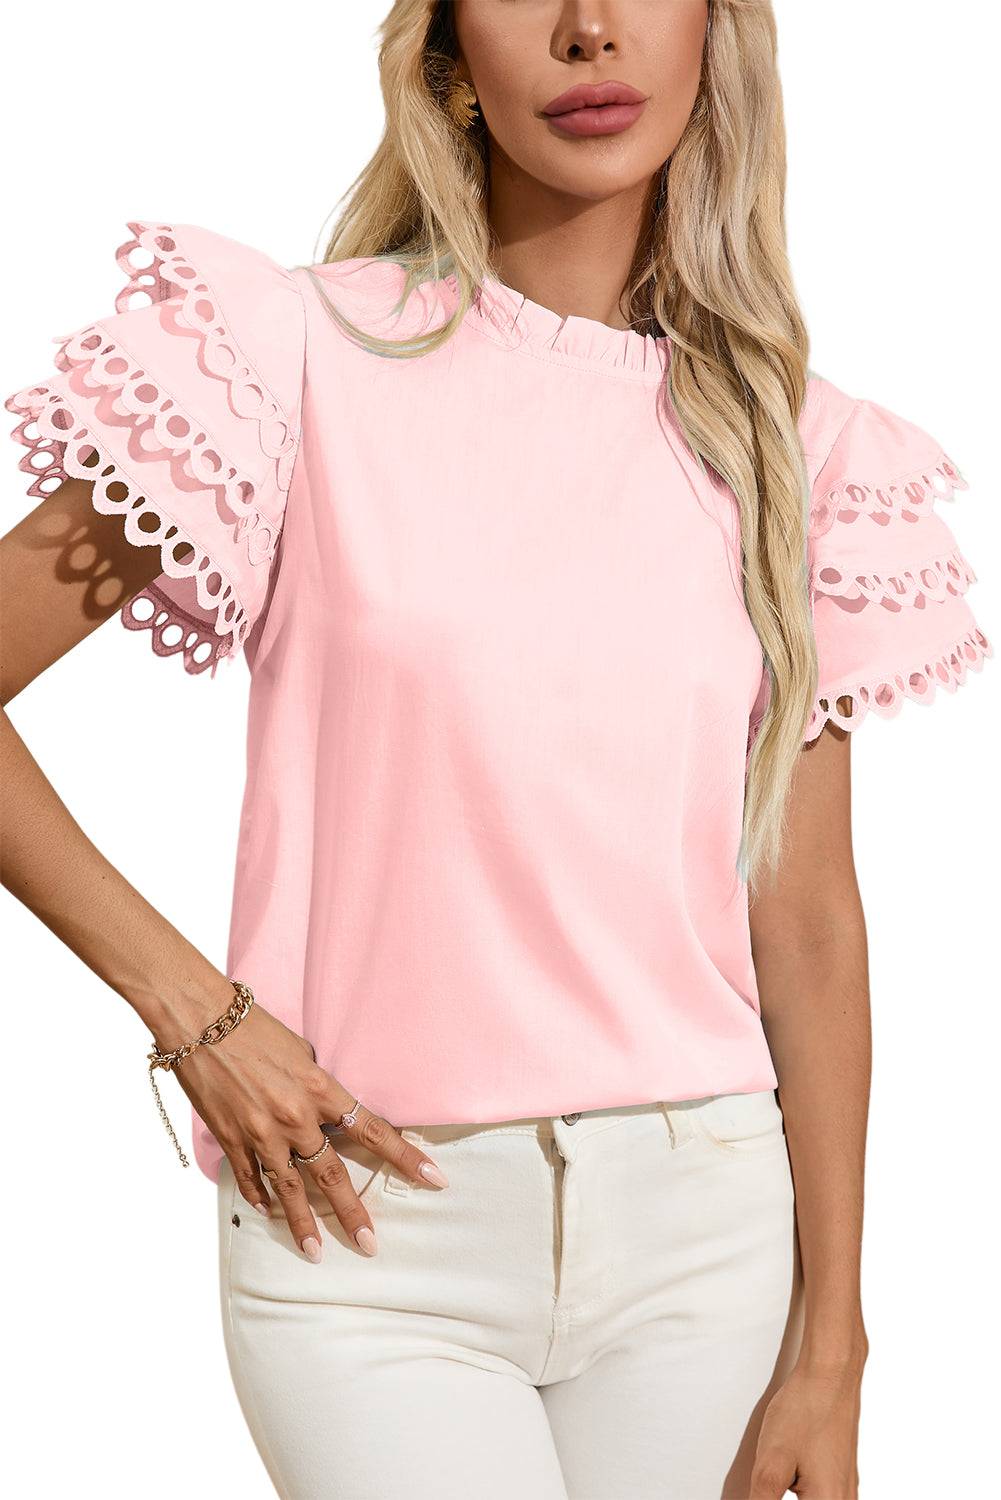 a woman wearing a pink top with scalloped sleeves